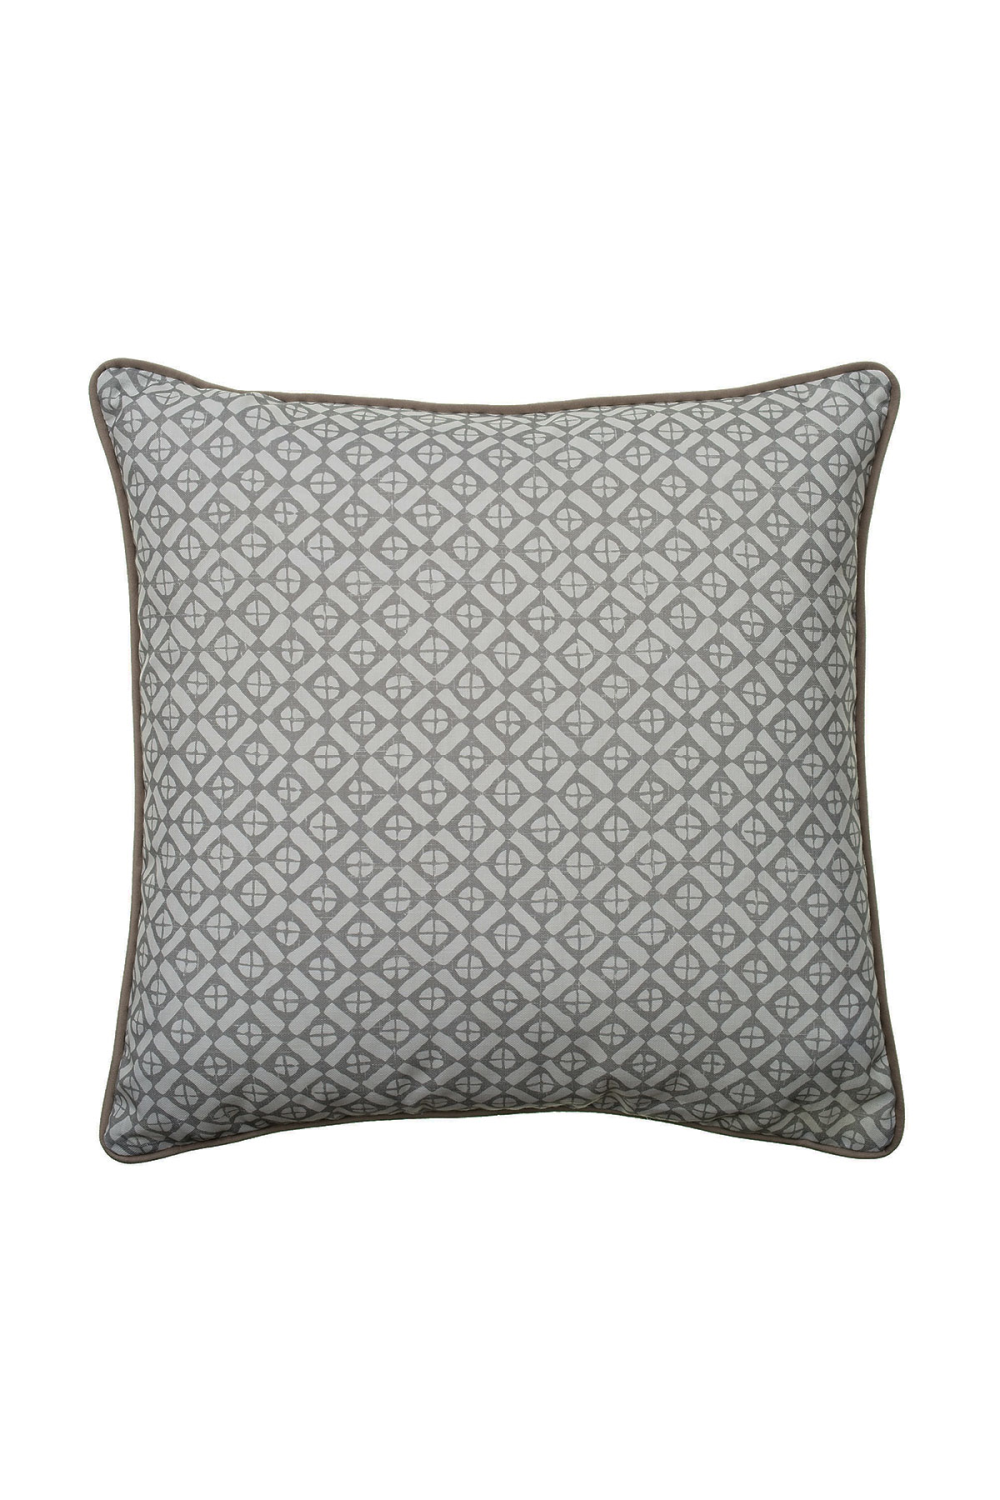 Diamond Patterned Outdoor Throw Pillow | Andrew Martin Audley | OROA